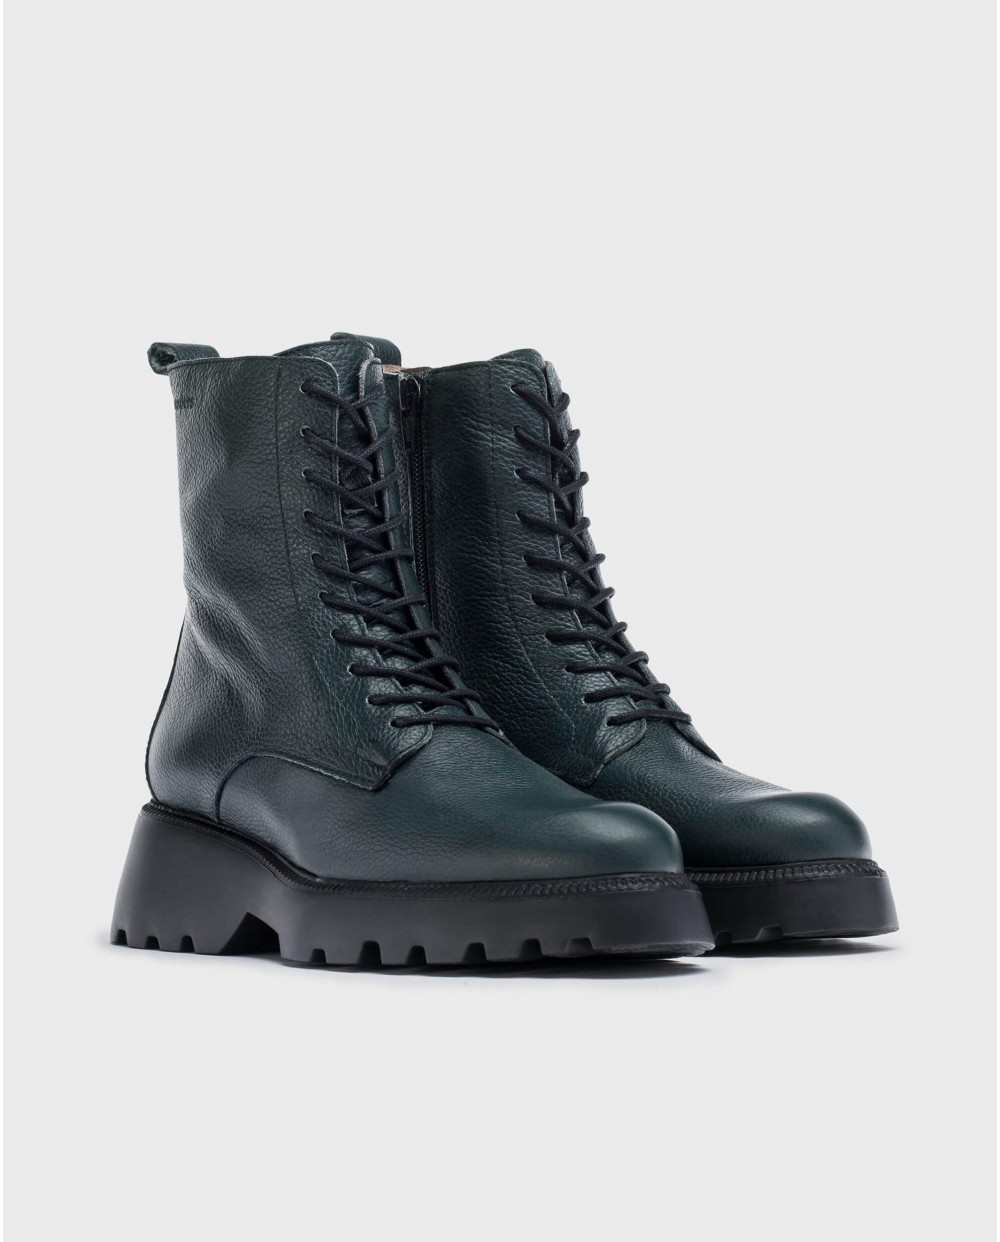 Green leather ATARI ankle boot